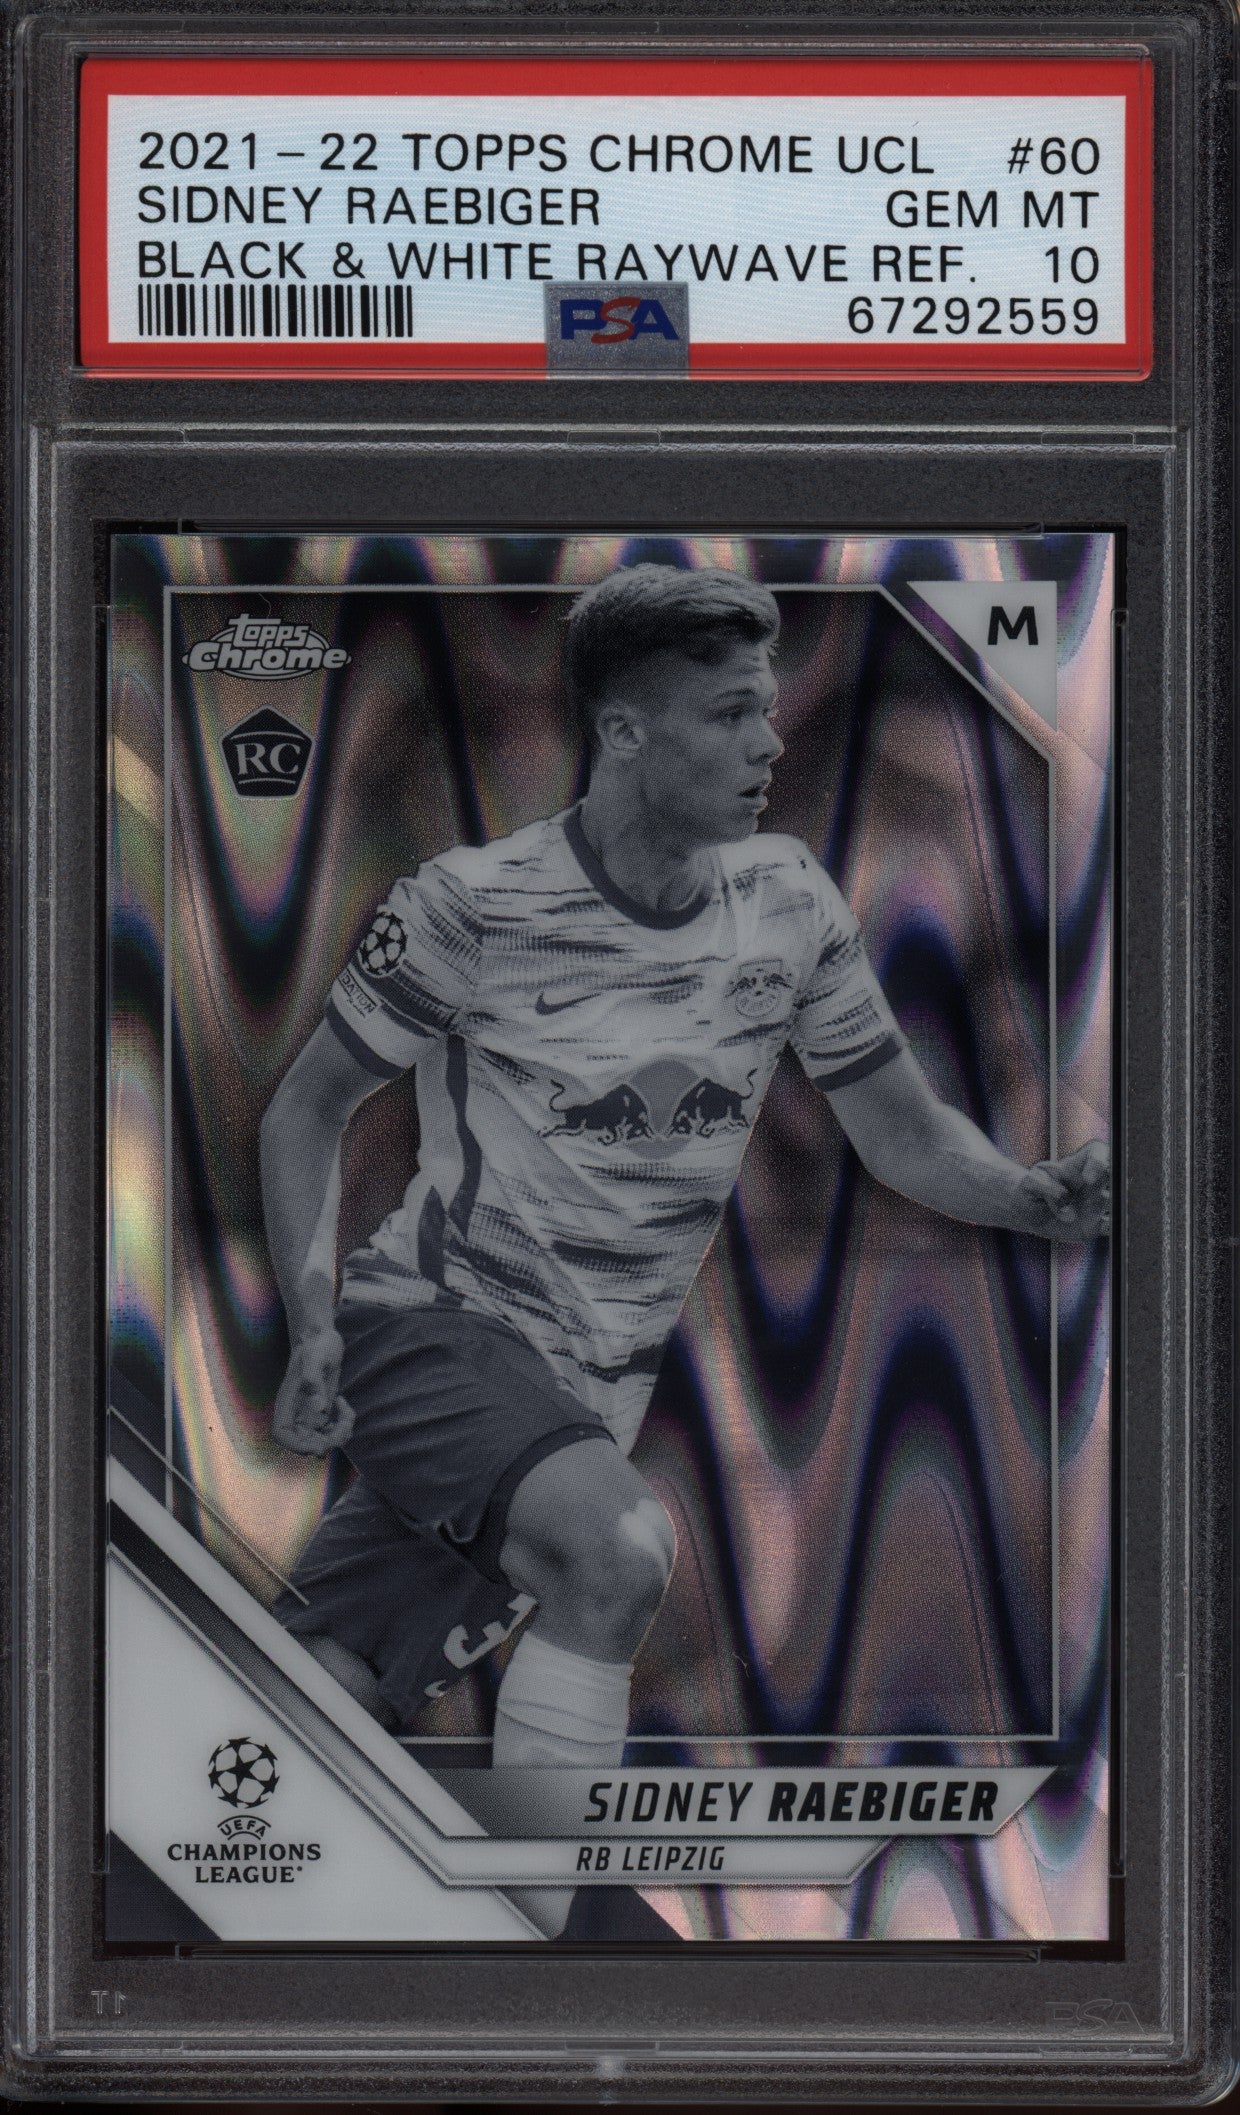 Sidney Raebiger 2021-22 Topps Chrome UCL Black & White Ray Wave 